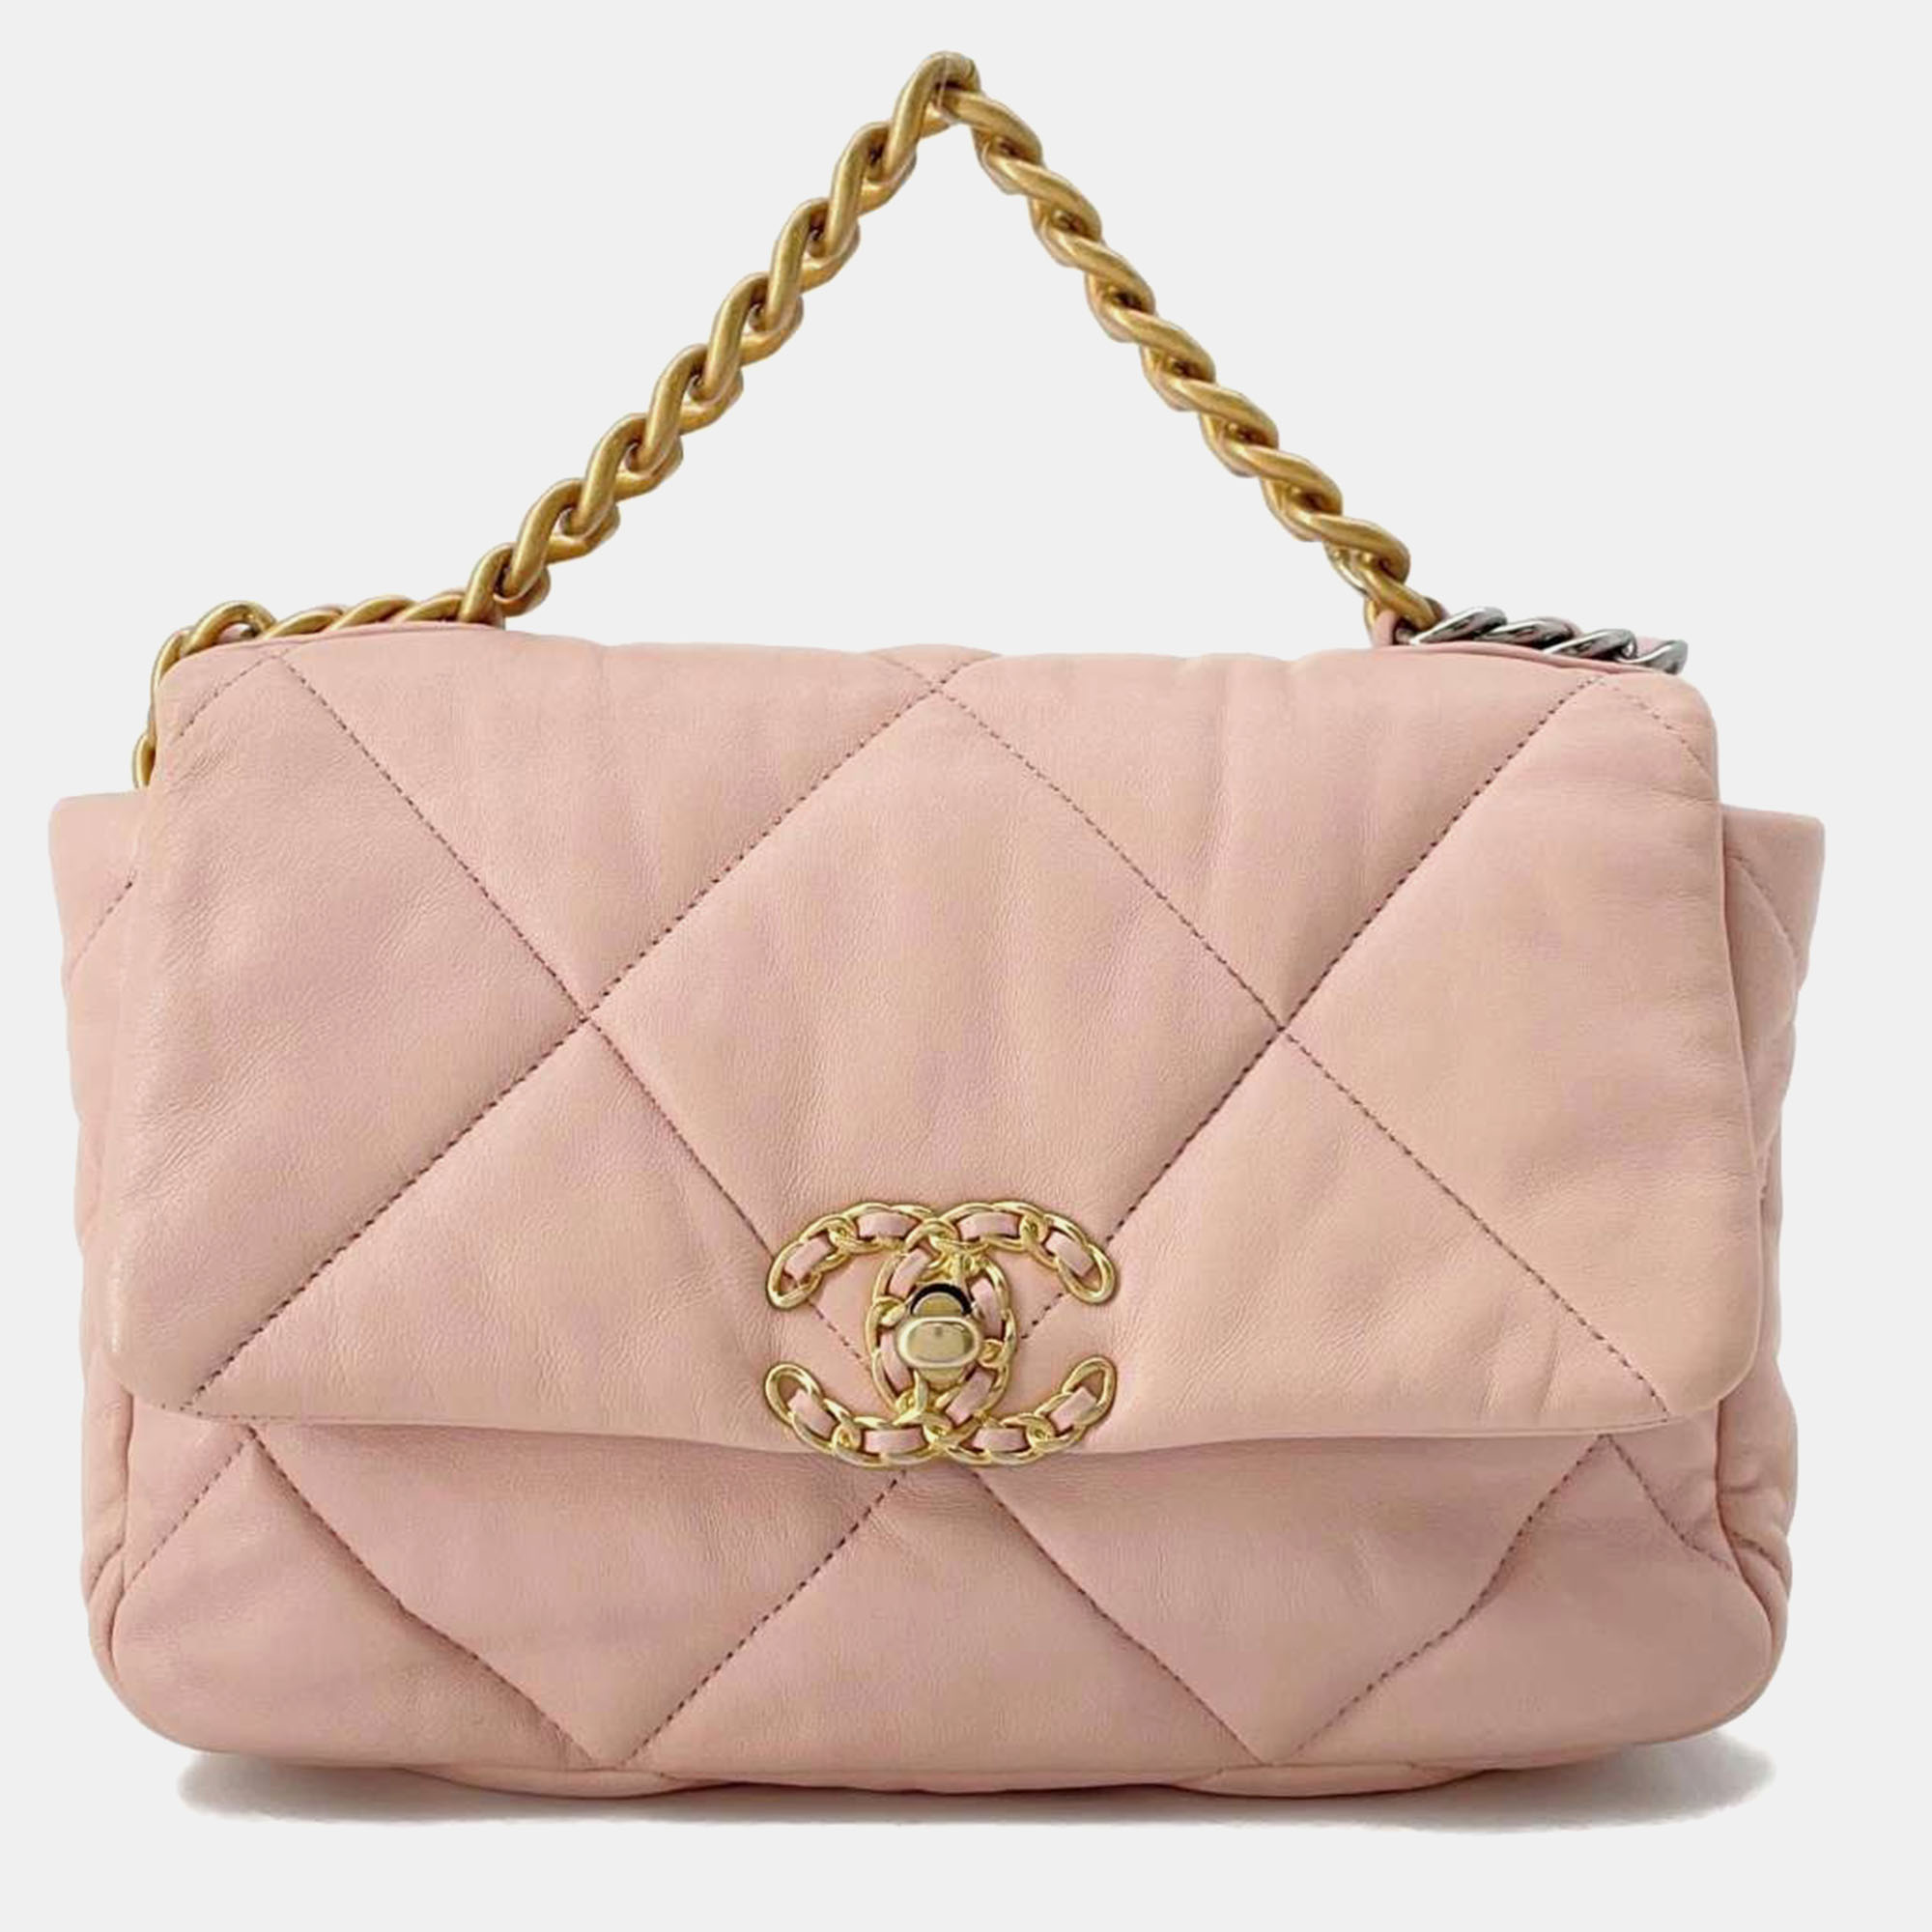 

Chanel Pink Quilted Leather 19 Flap Bag